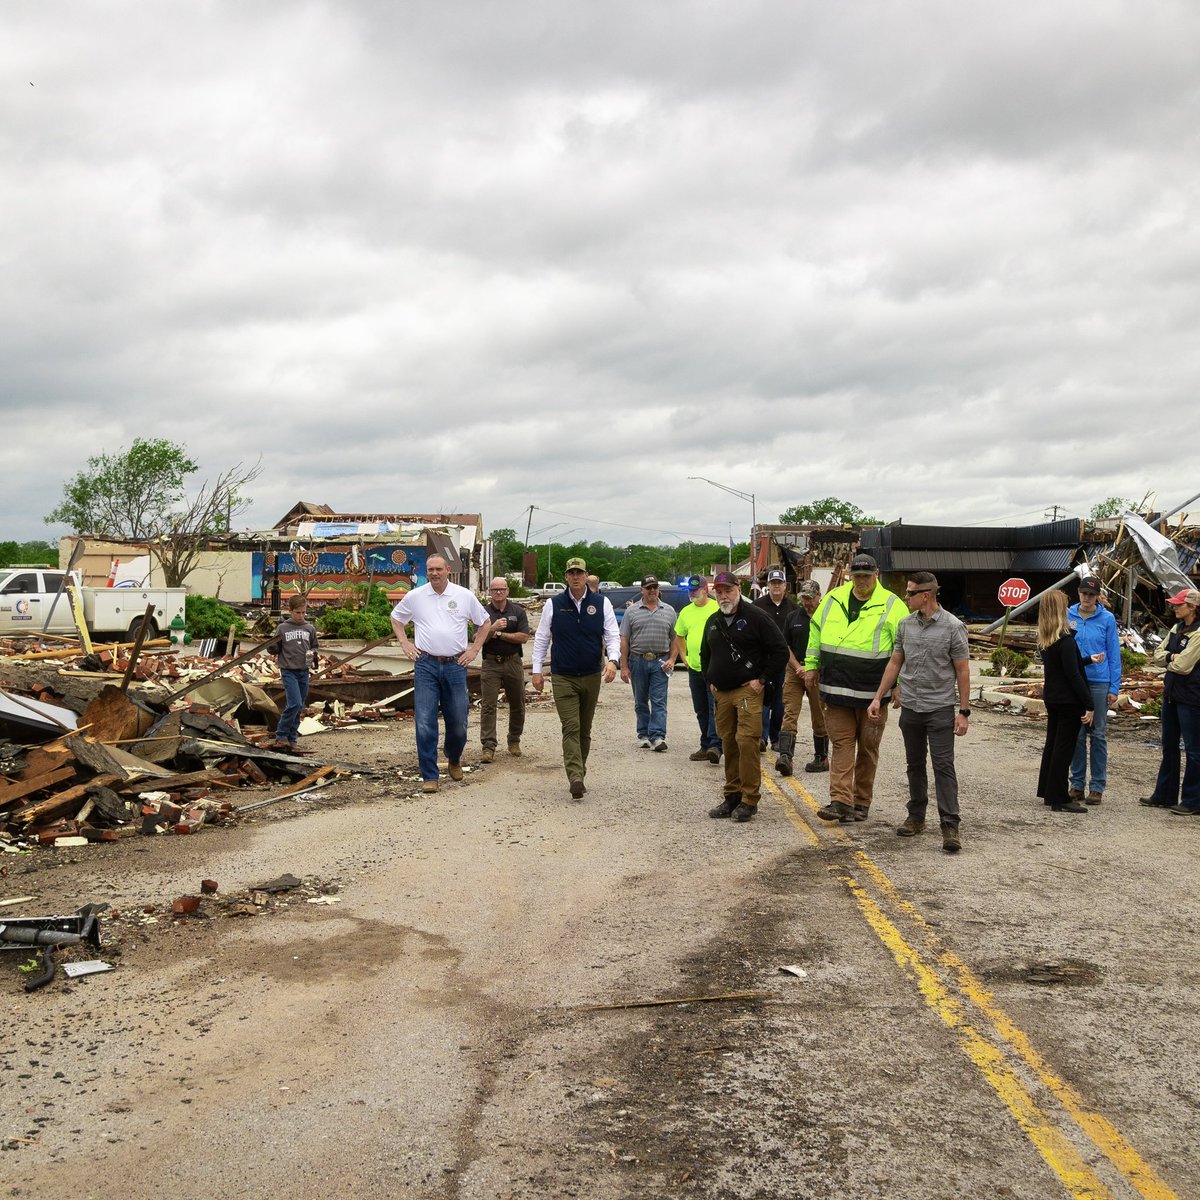 We’ll build back stronger than ever before— that’s my promise to Sulphur, Holdenville, and every Oklahoma community facing loss today. The Oklahoma Standard is alive and well.